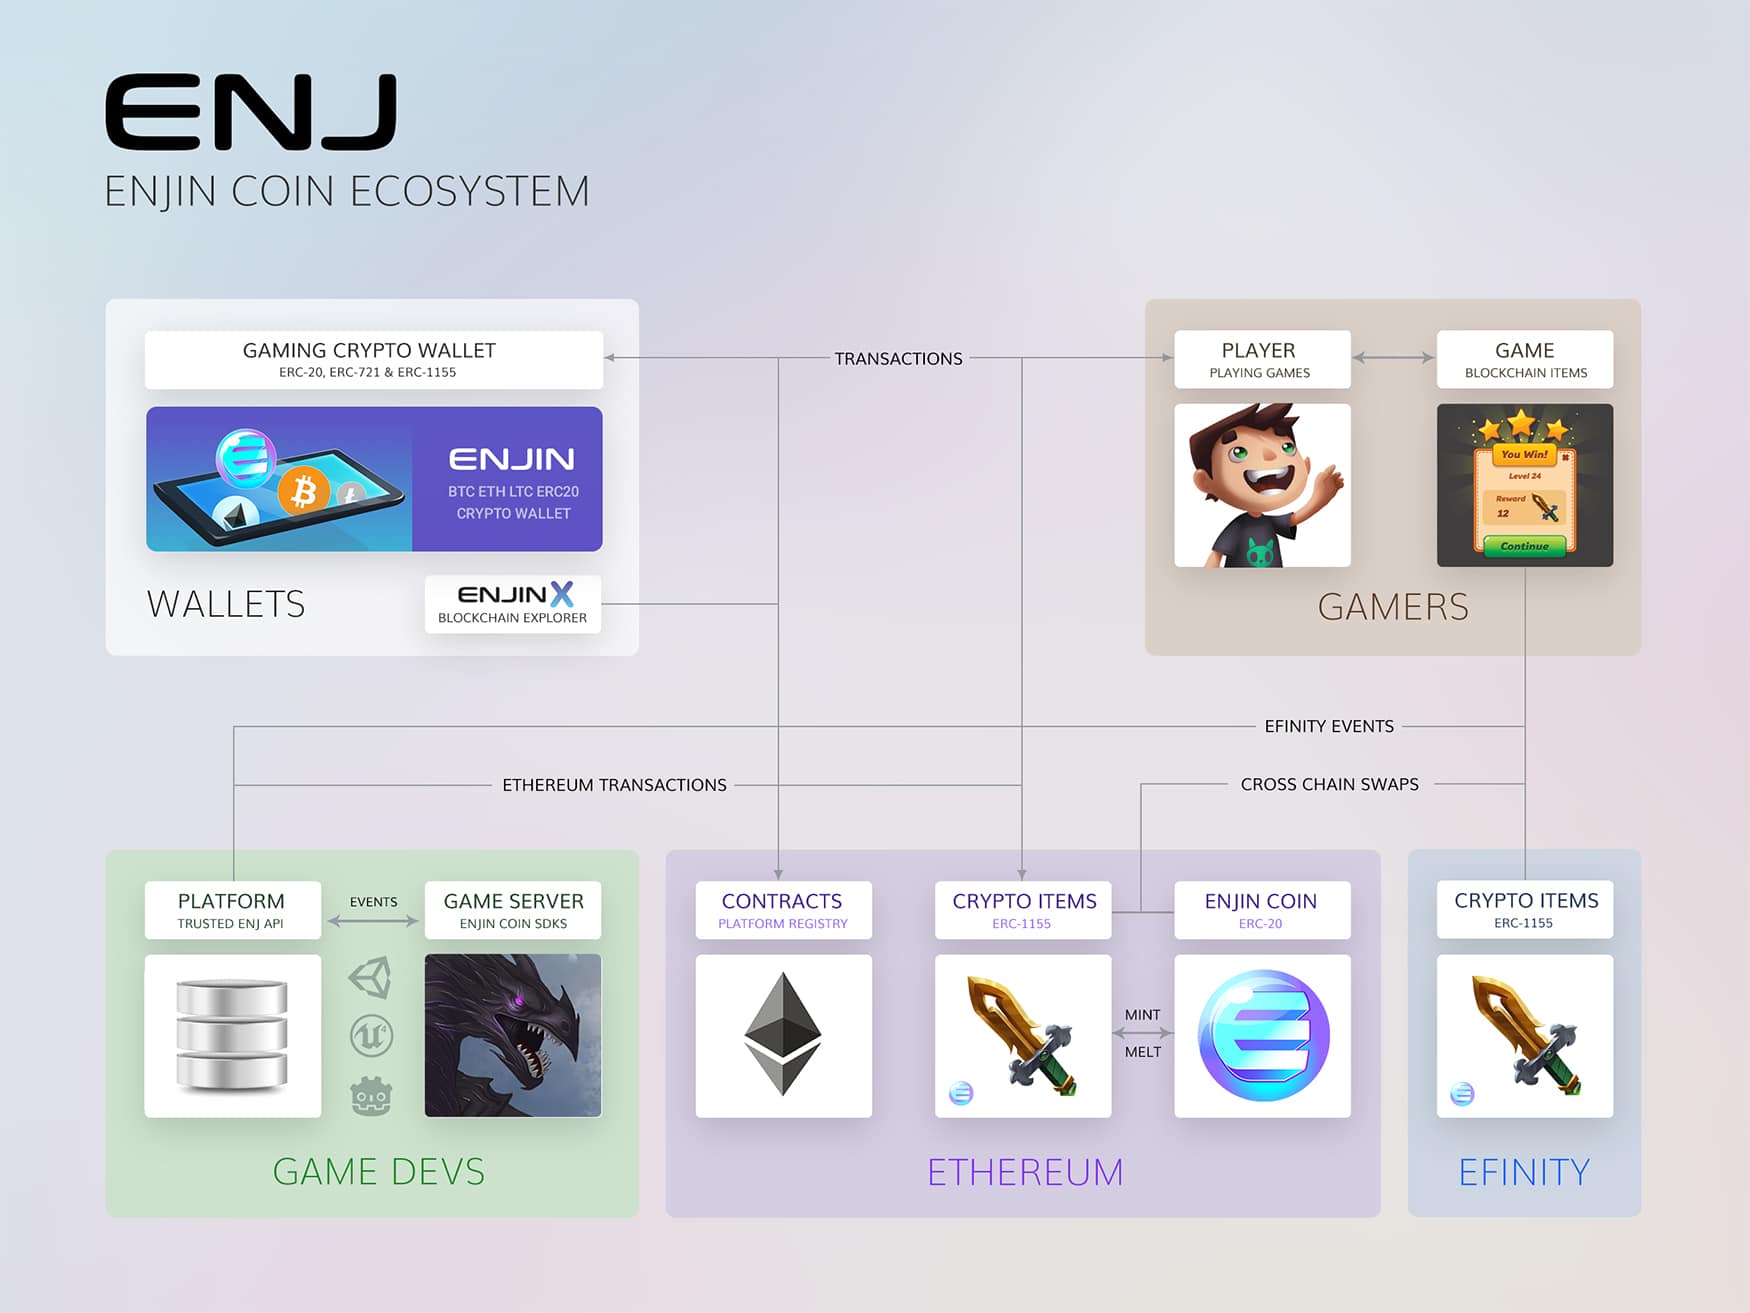  enj gaming crypto coin complete guide enjin 